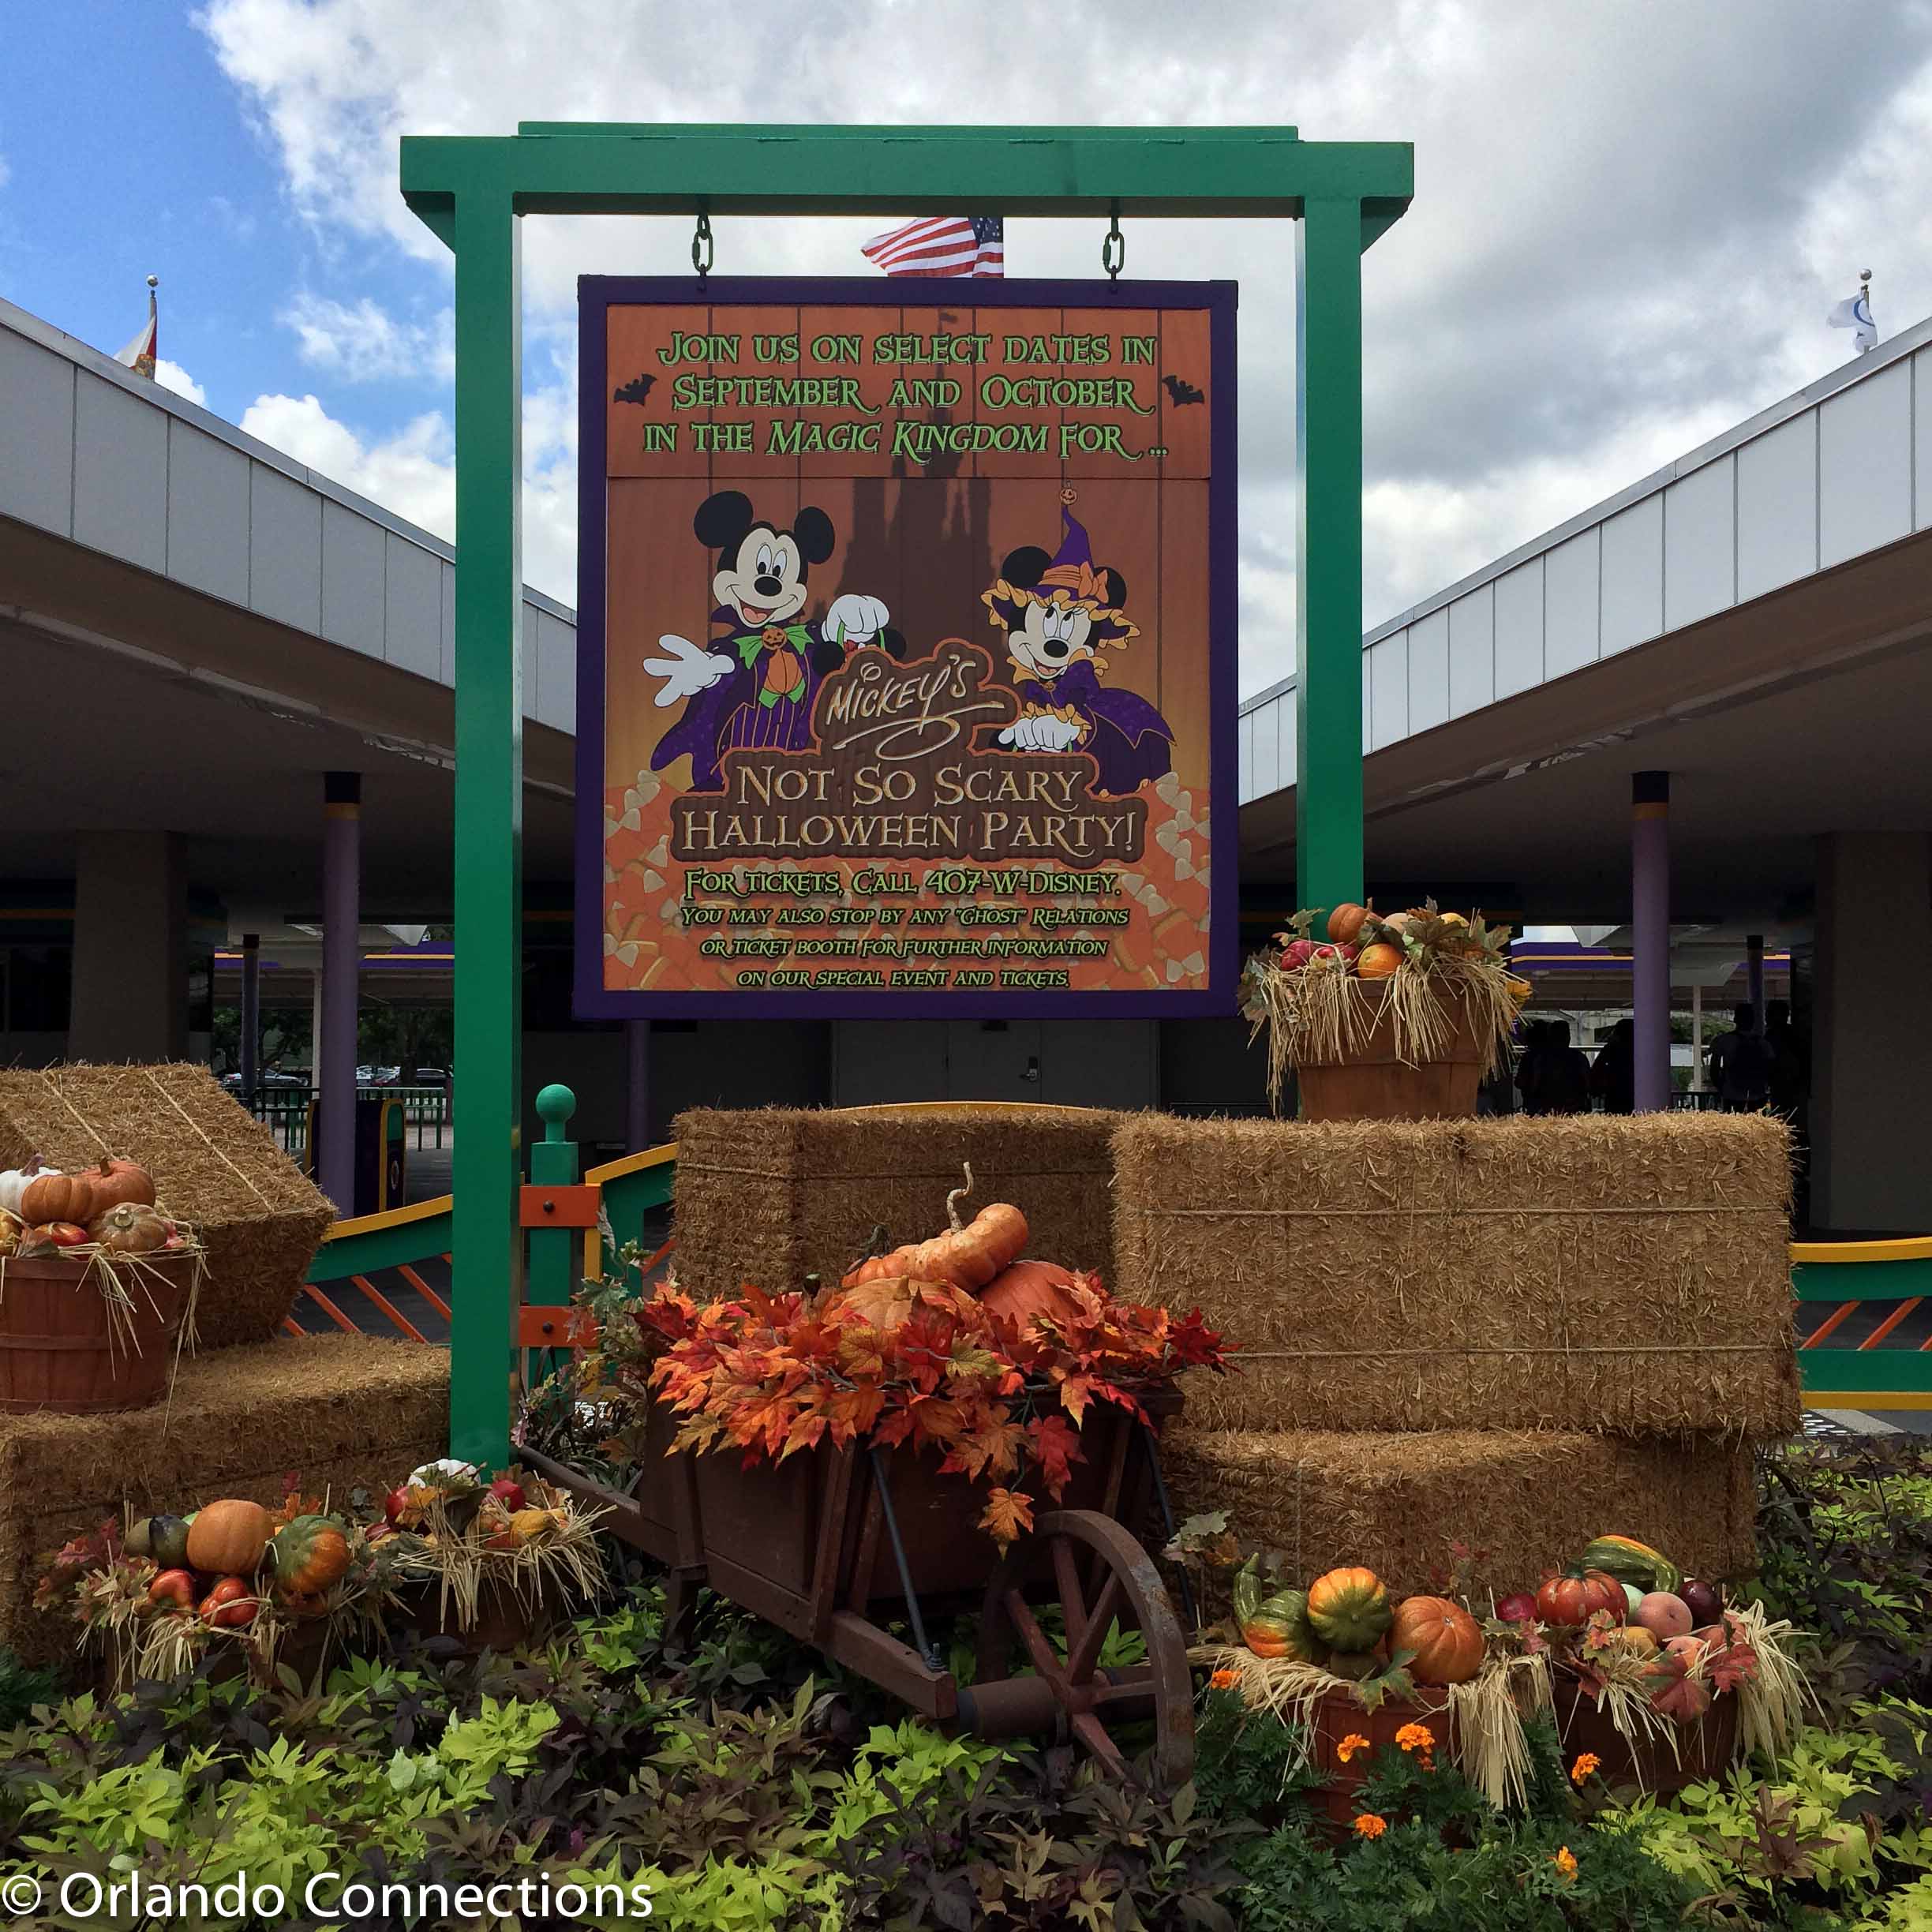 New Enhancements at Mickey’s Not So Scary Halloween Party